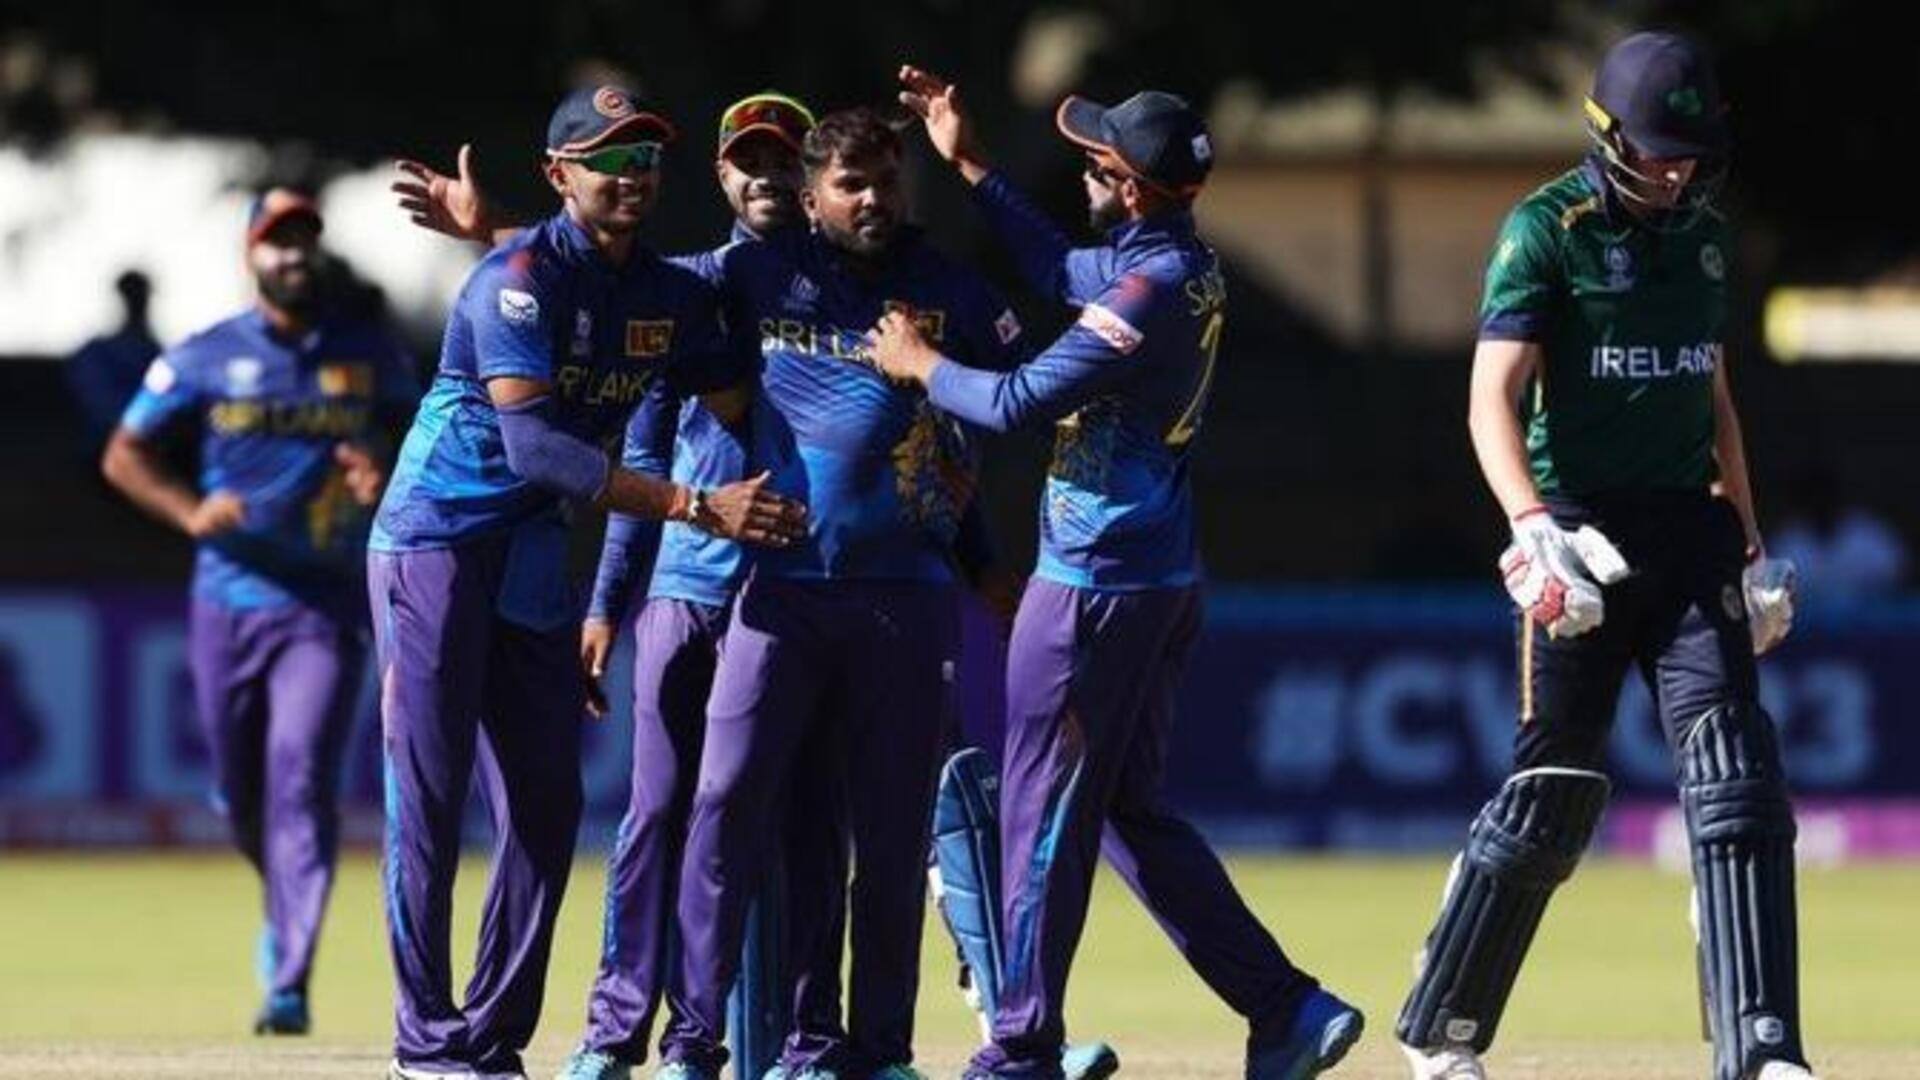 CWC Qualifiers, Sri Lanka too good for sorry Ireland: Stats